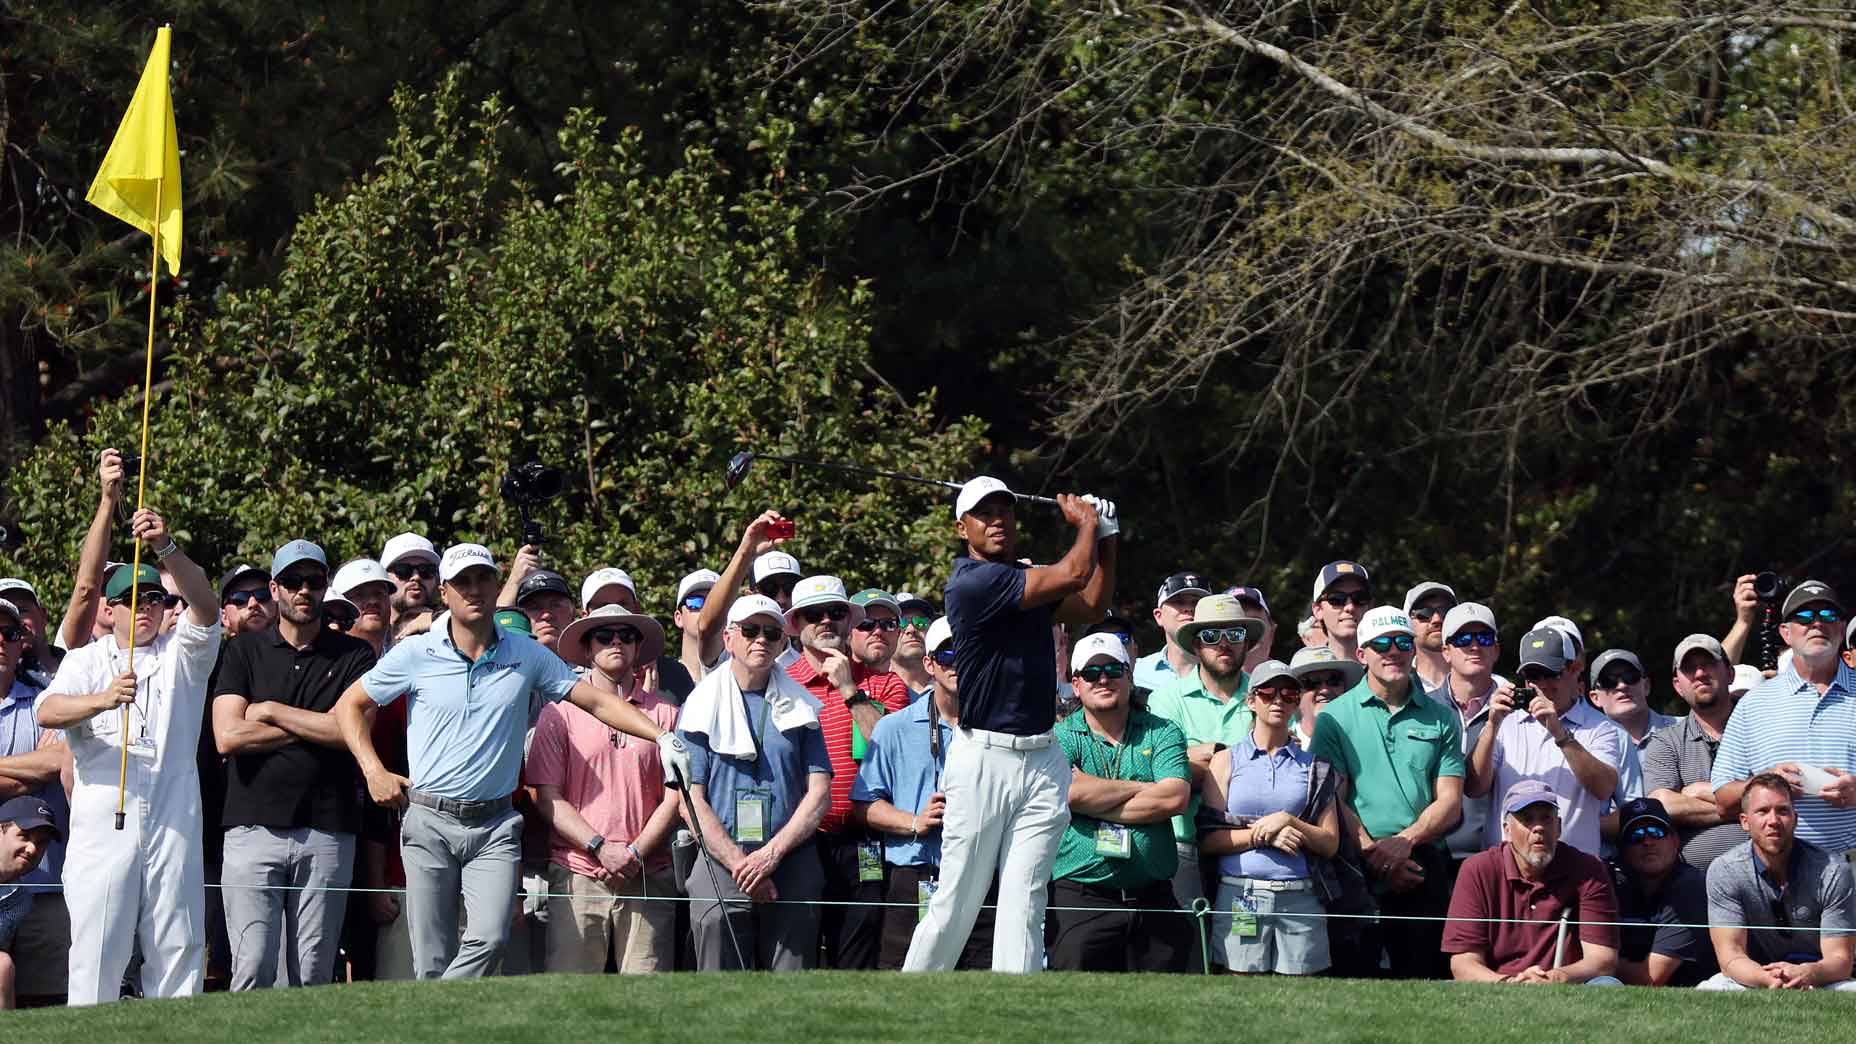 Tiger Woods hits shot in front of fans in practice round for 2022 Masters